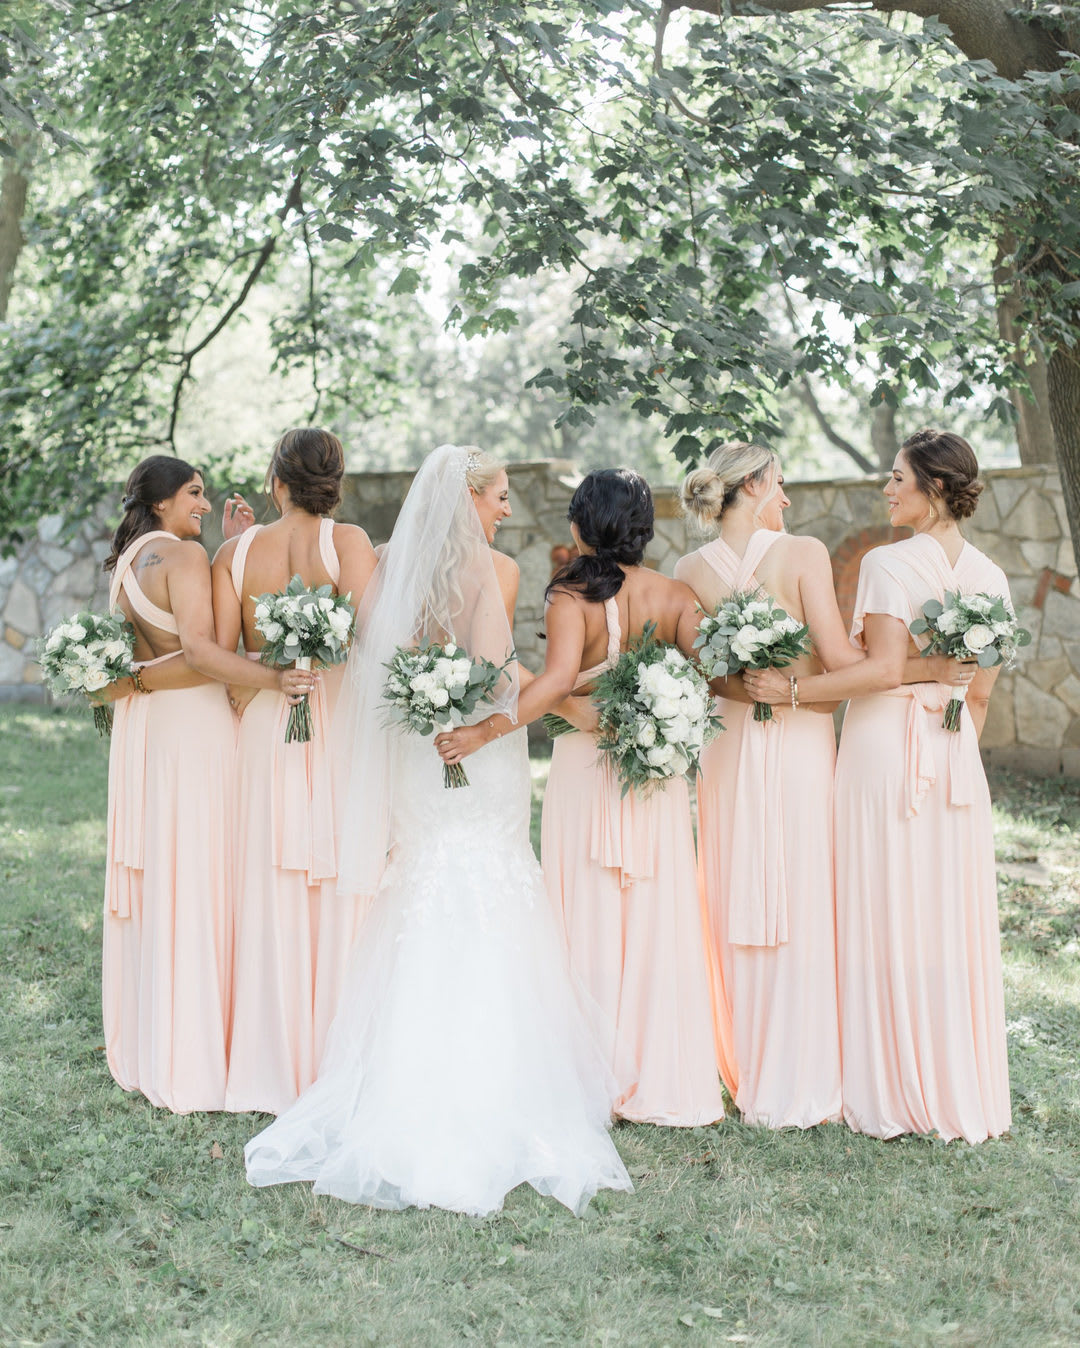 The Prettiest Pink Bridesmaids' Dresses for Spring